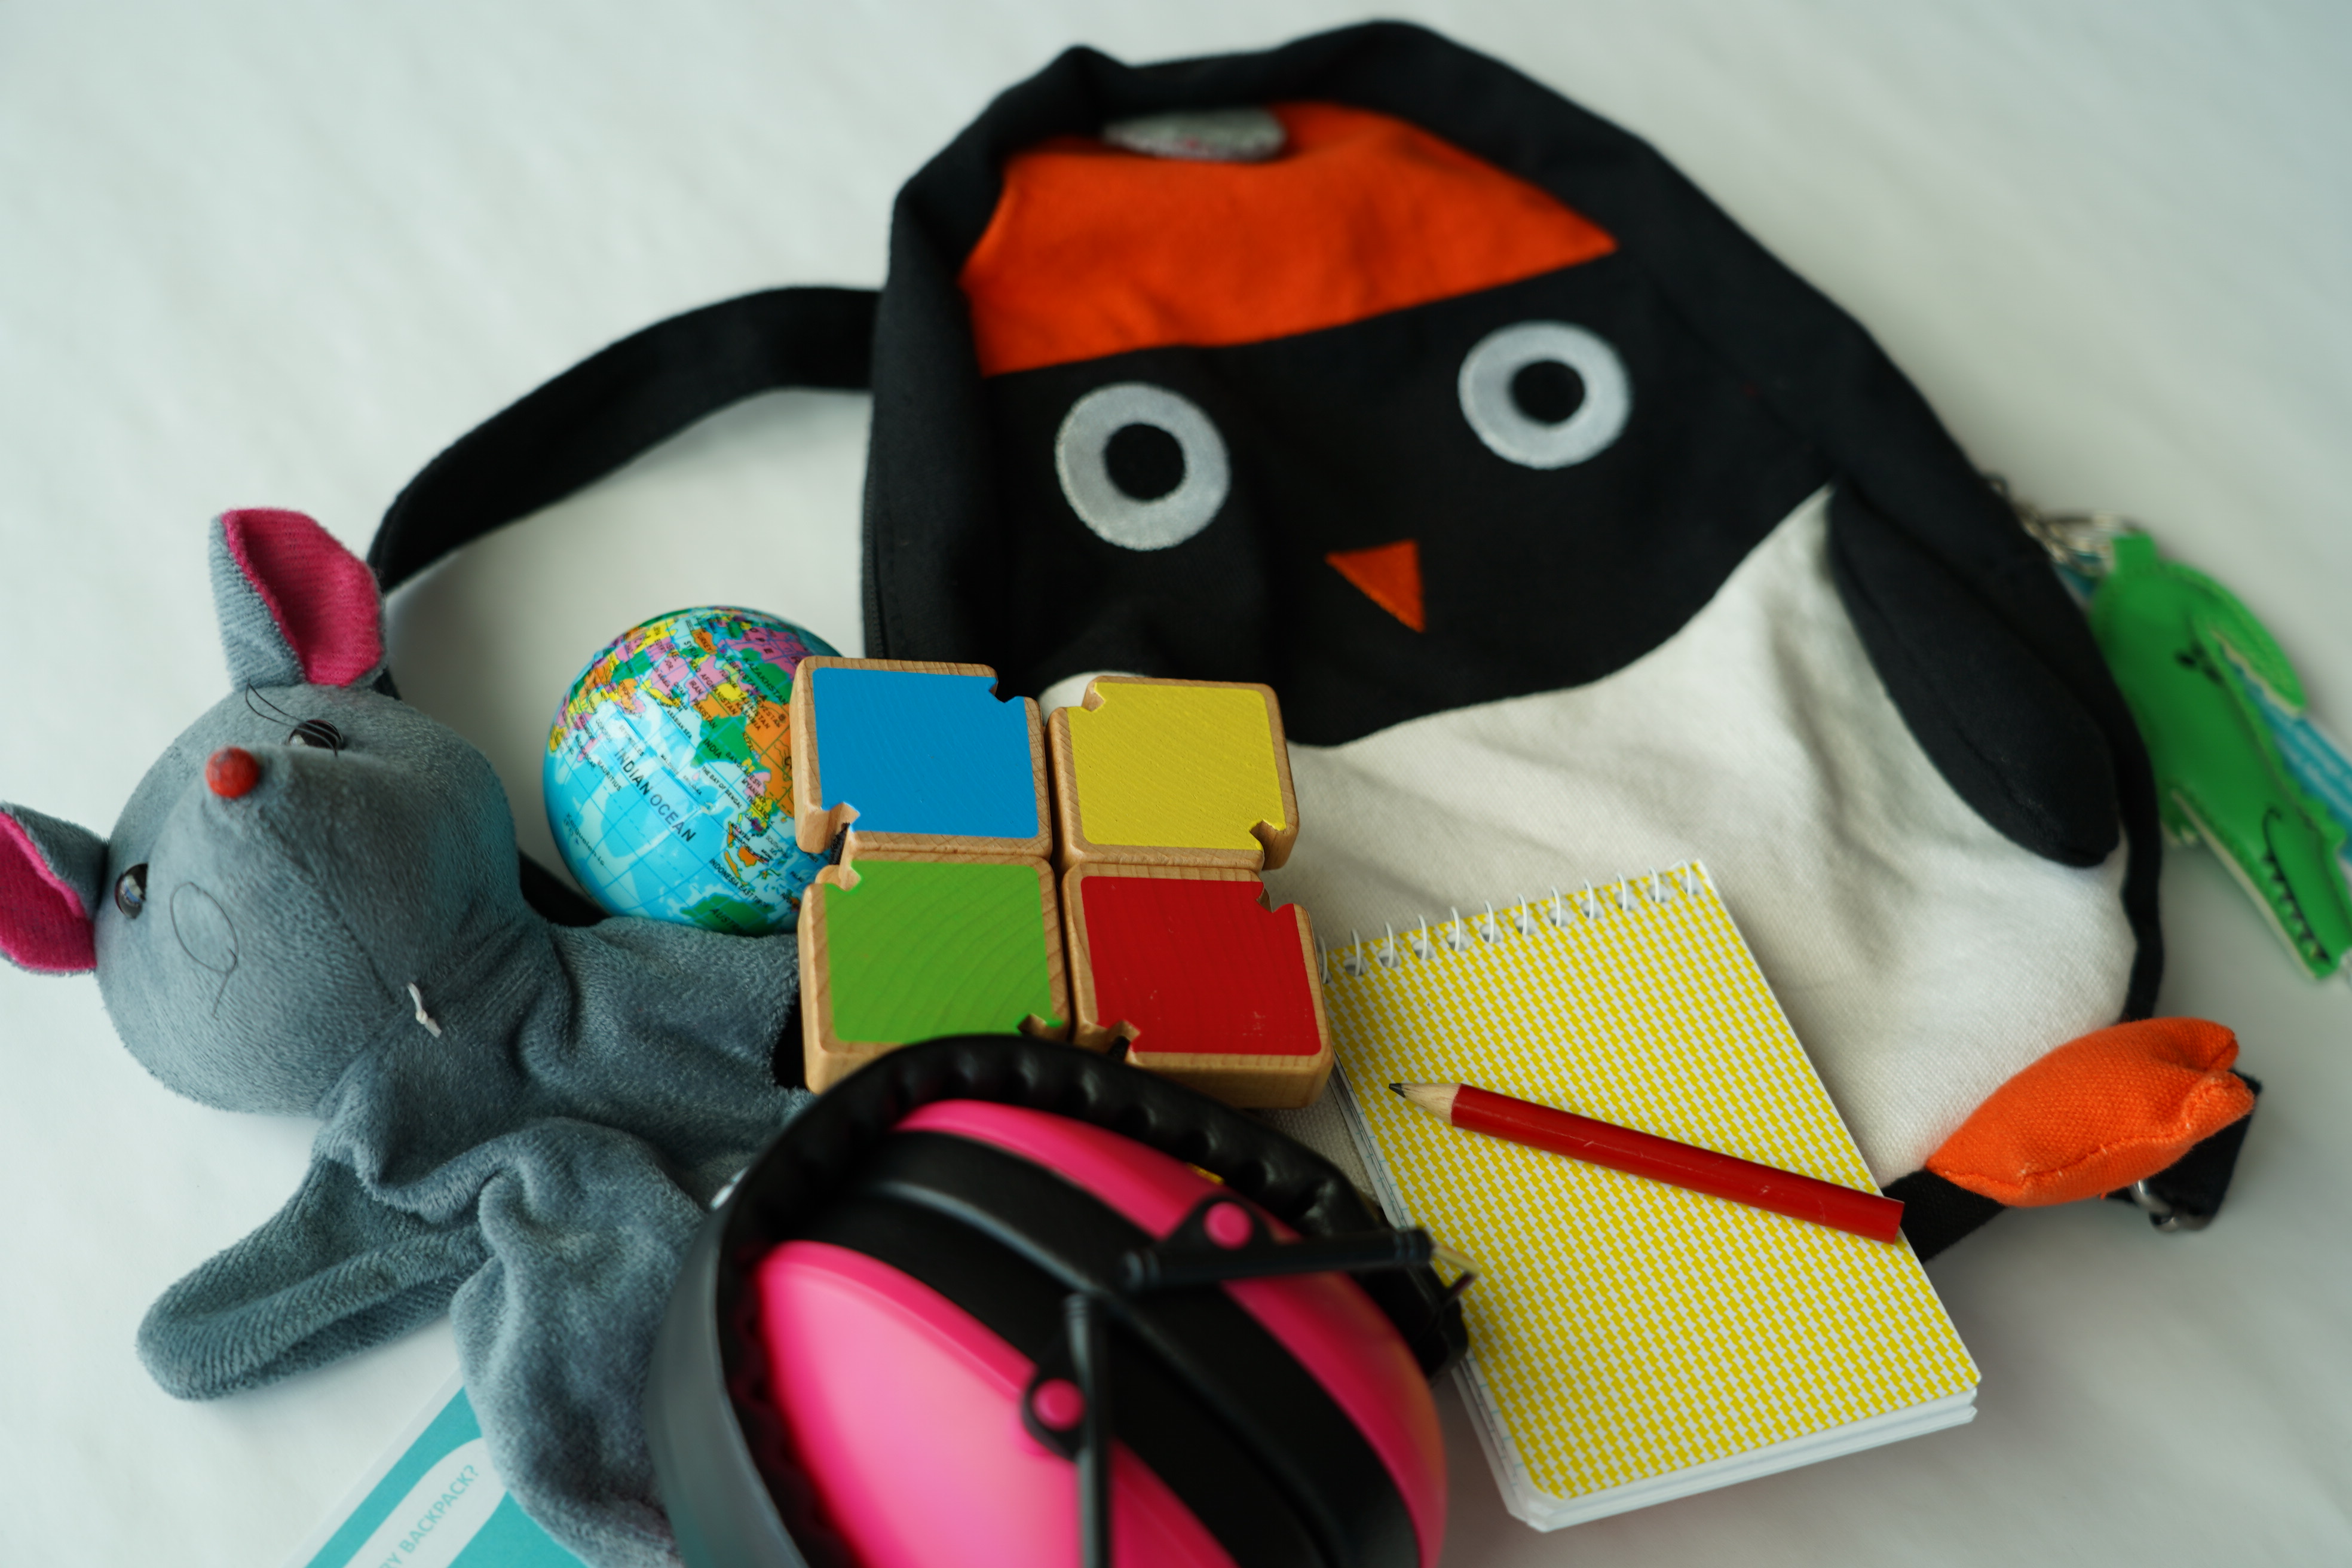 Contents of Sensory Backpack